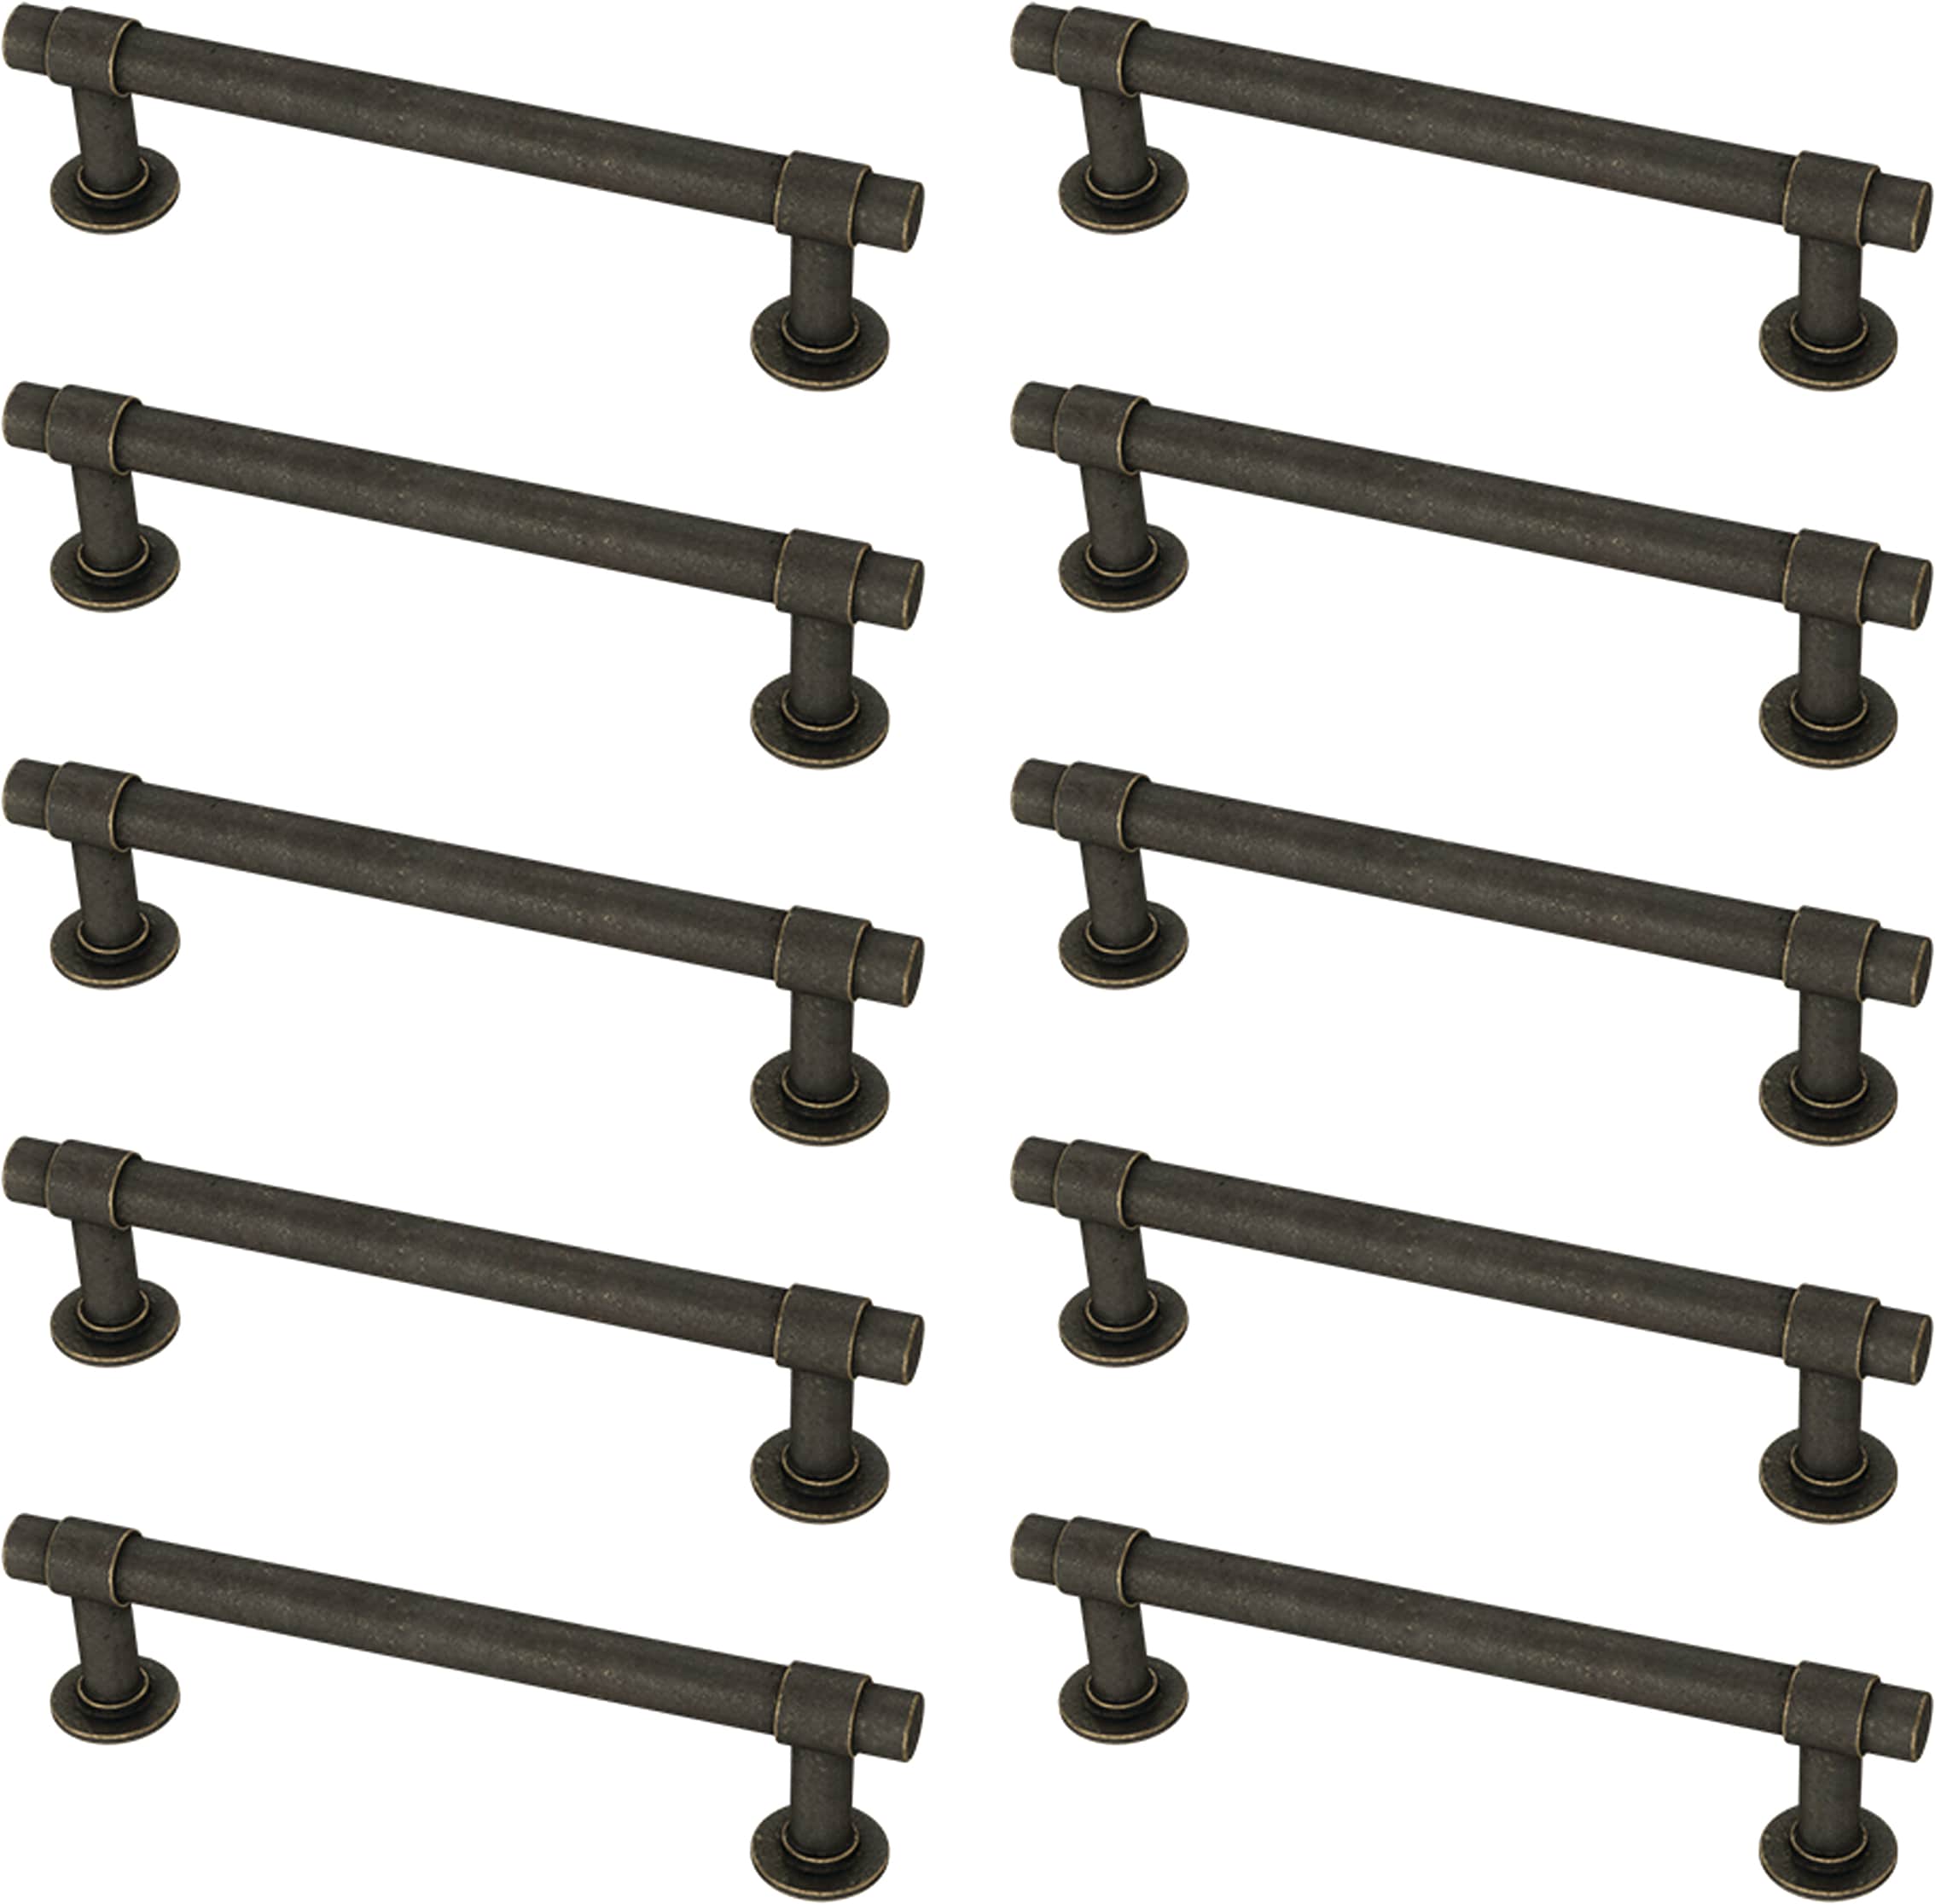 10 pack Franklin Brass P29618K-SI-B Soft Iron 5-Inch Francisco Kitchen or Furniture Cabinet Hardware Drawer Handle Pull